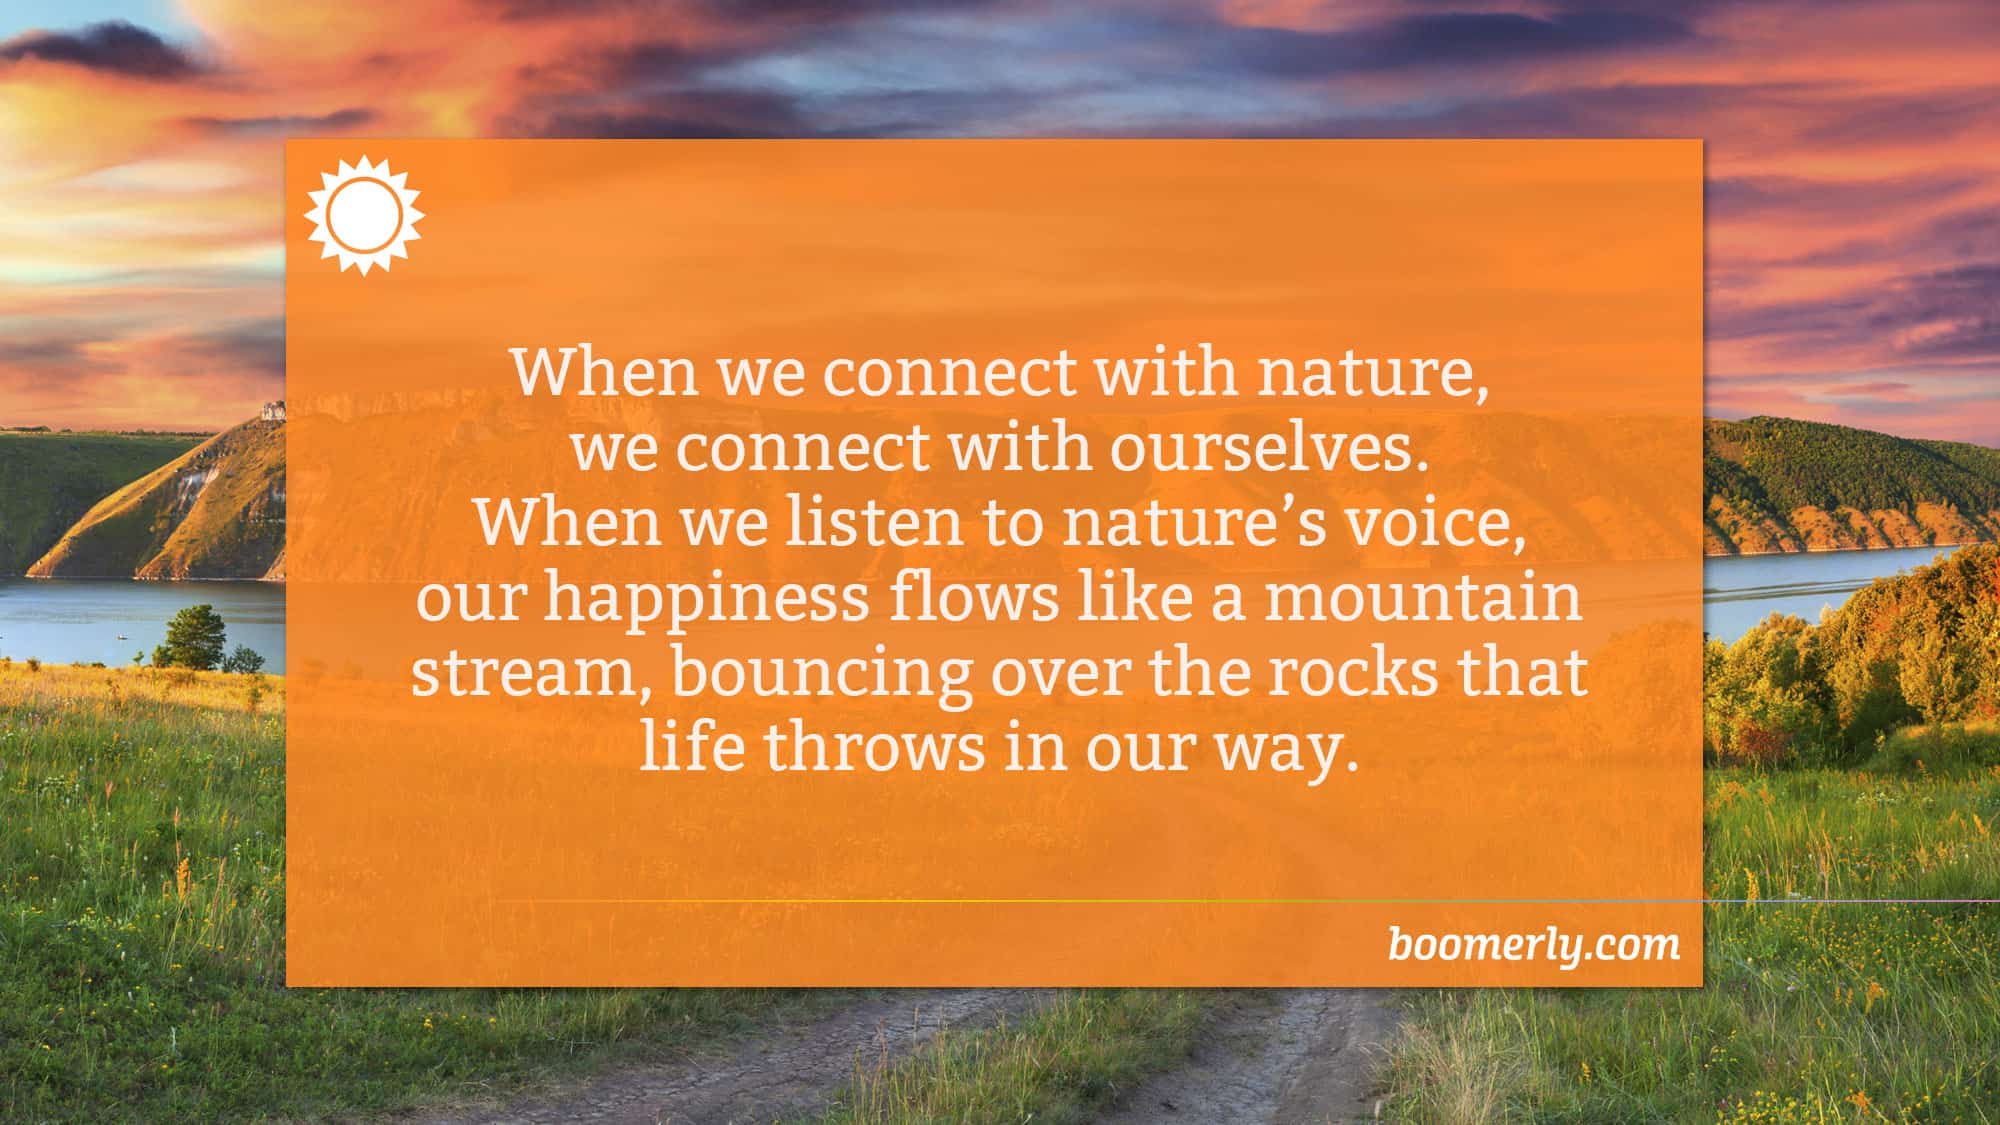 Boomerly.com - When we connect with nature, we connect with ourselves. When we listen to nature’s voice, our happiness flows like a mountain stream, bouncing over the rocks that life throws in our way.